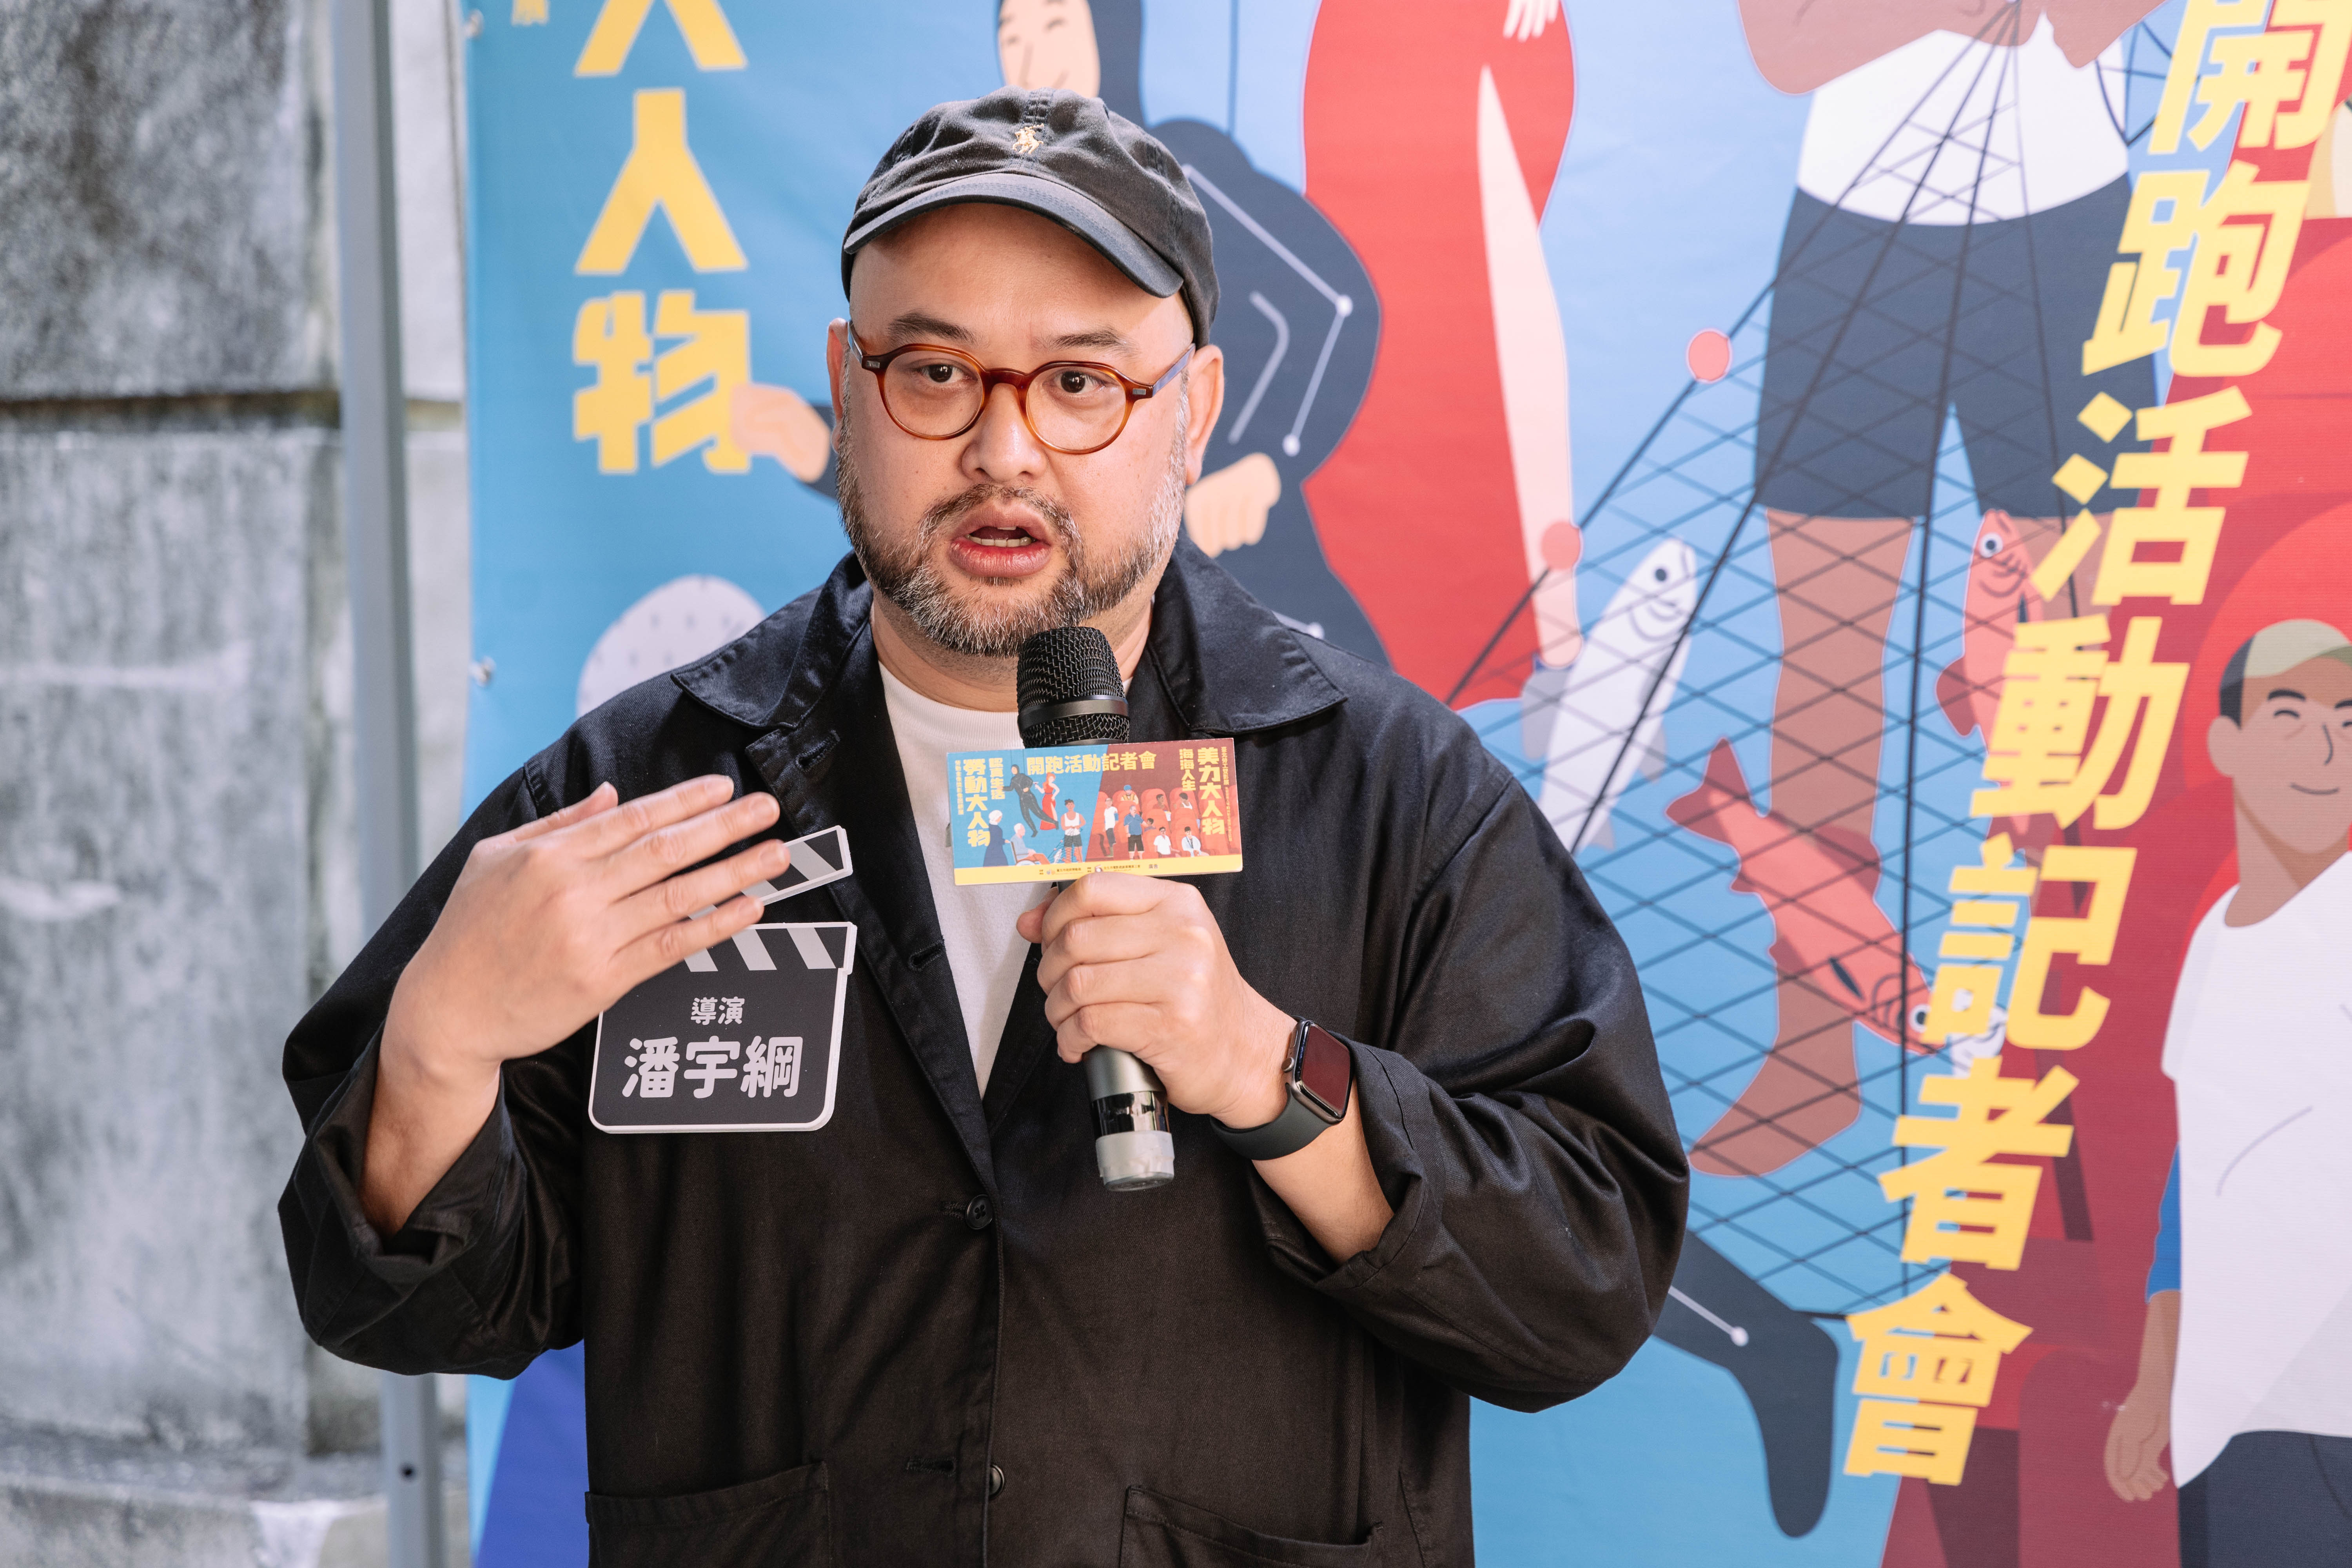 Multiple films from the viewpoint of labor and migrant workers are featured in Taipei International Labor Film Festival.   Photo provided by Department of Labor, Taipei City Government